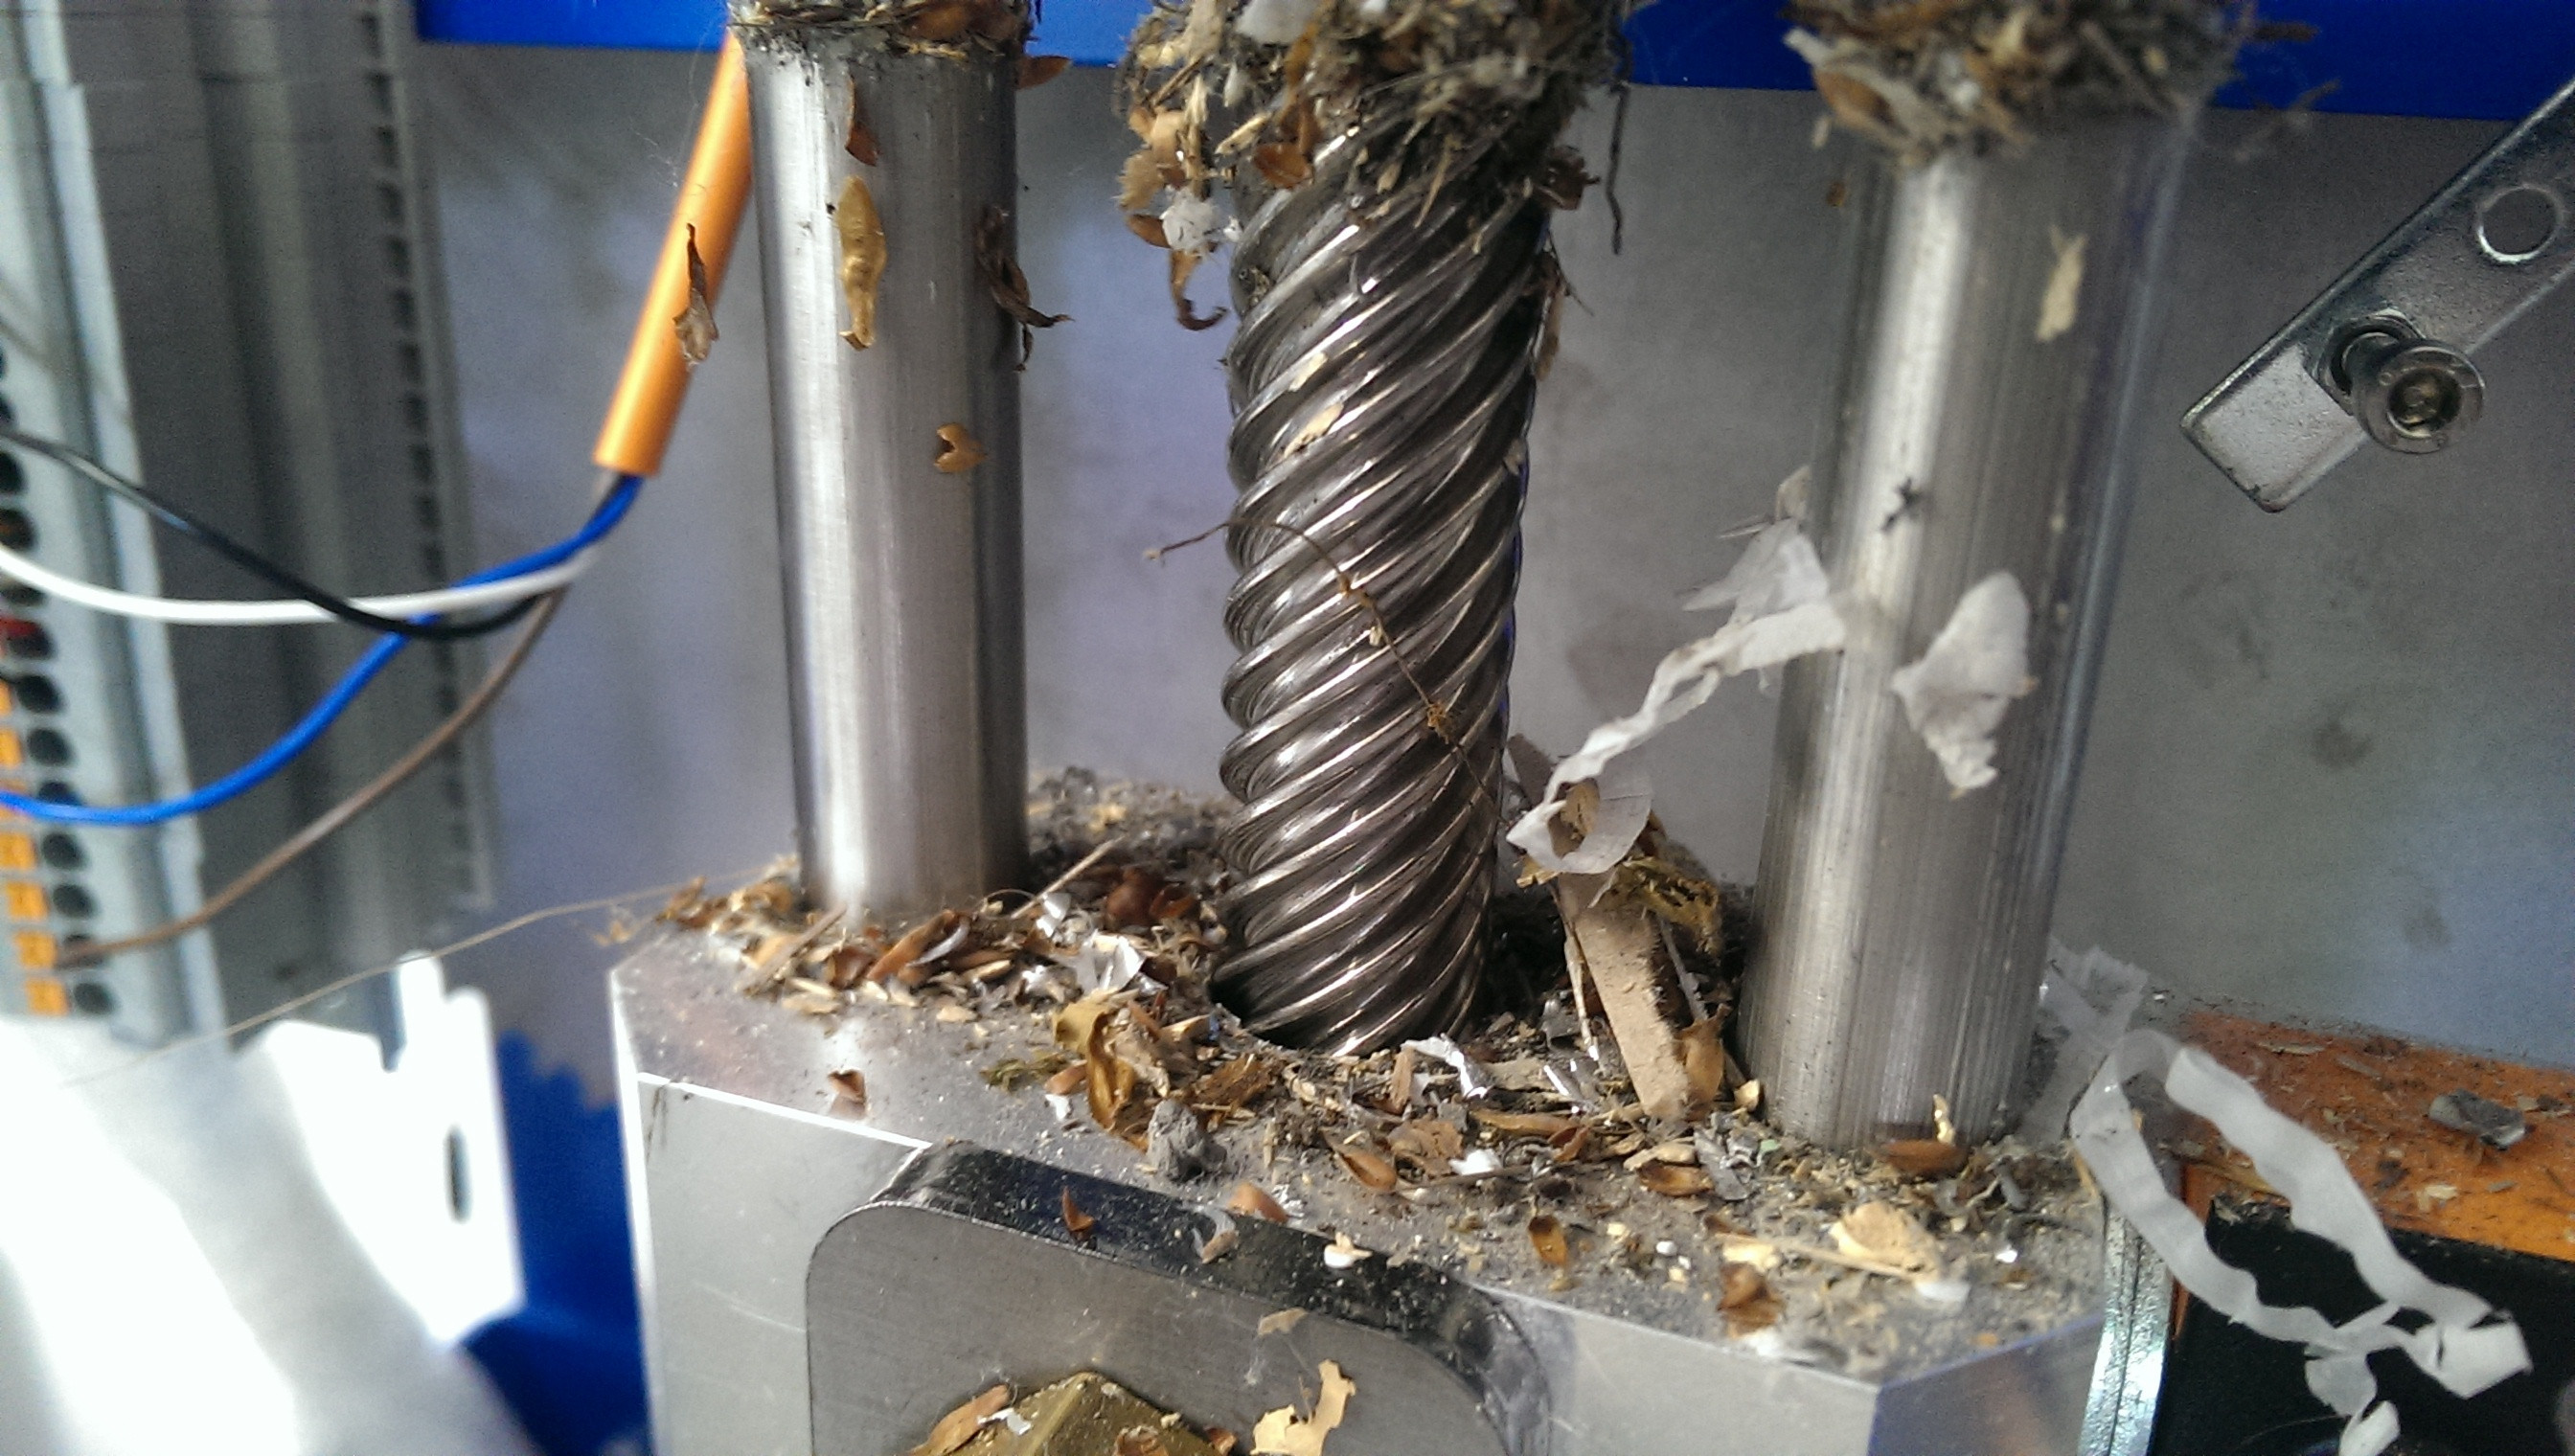 A lead-screw driven actuator close-up with various metal and wood shavings covering parts of the screw